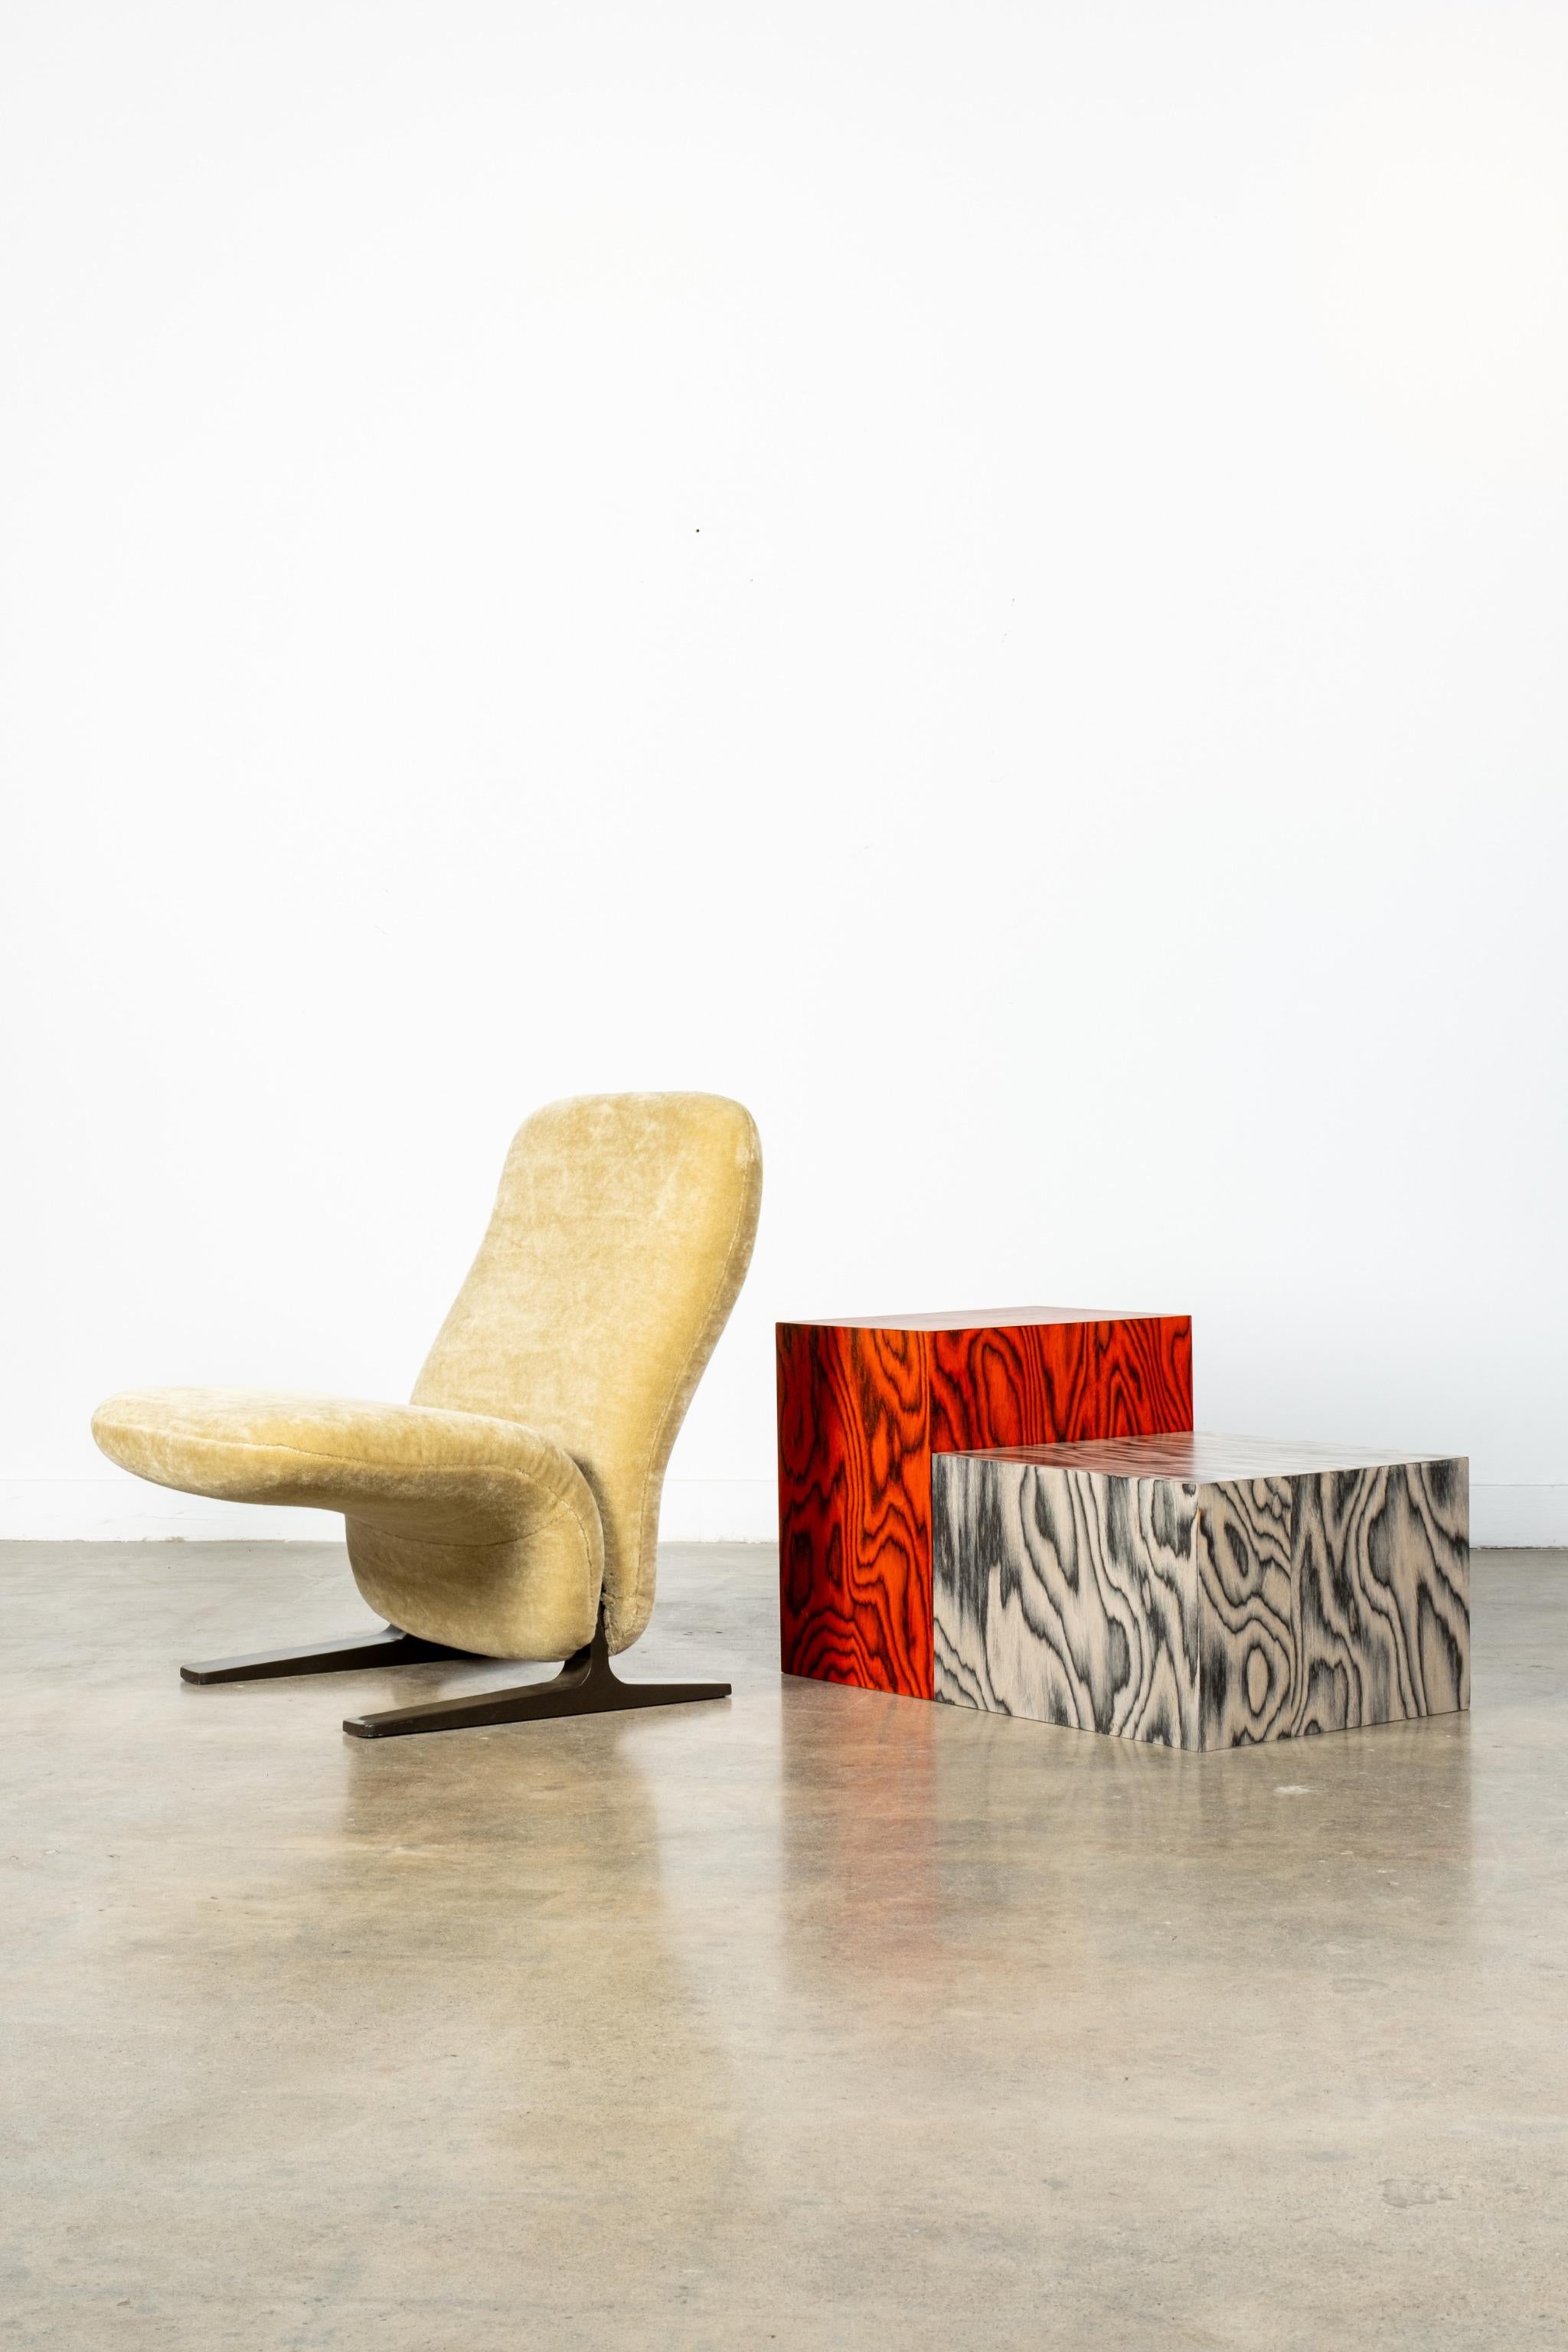 Designed By Bonne Choice Using Ettore Sottsass Veneer.
The veneer created by Ettore Sottsass in the 1980s – utilized for the first time in the Memphis collection – now becomes part of the Bonne Choice Bloques range in three color variants: red,